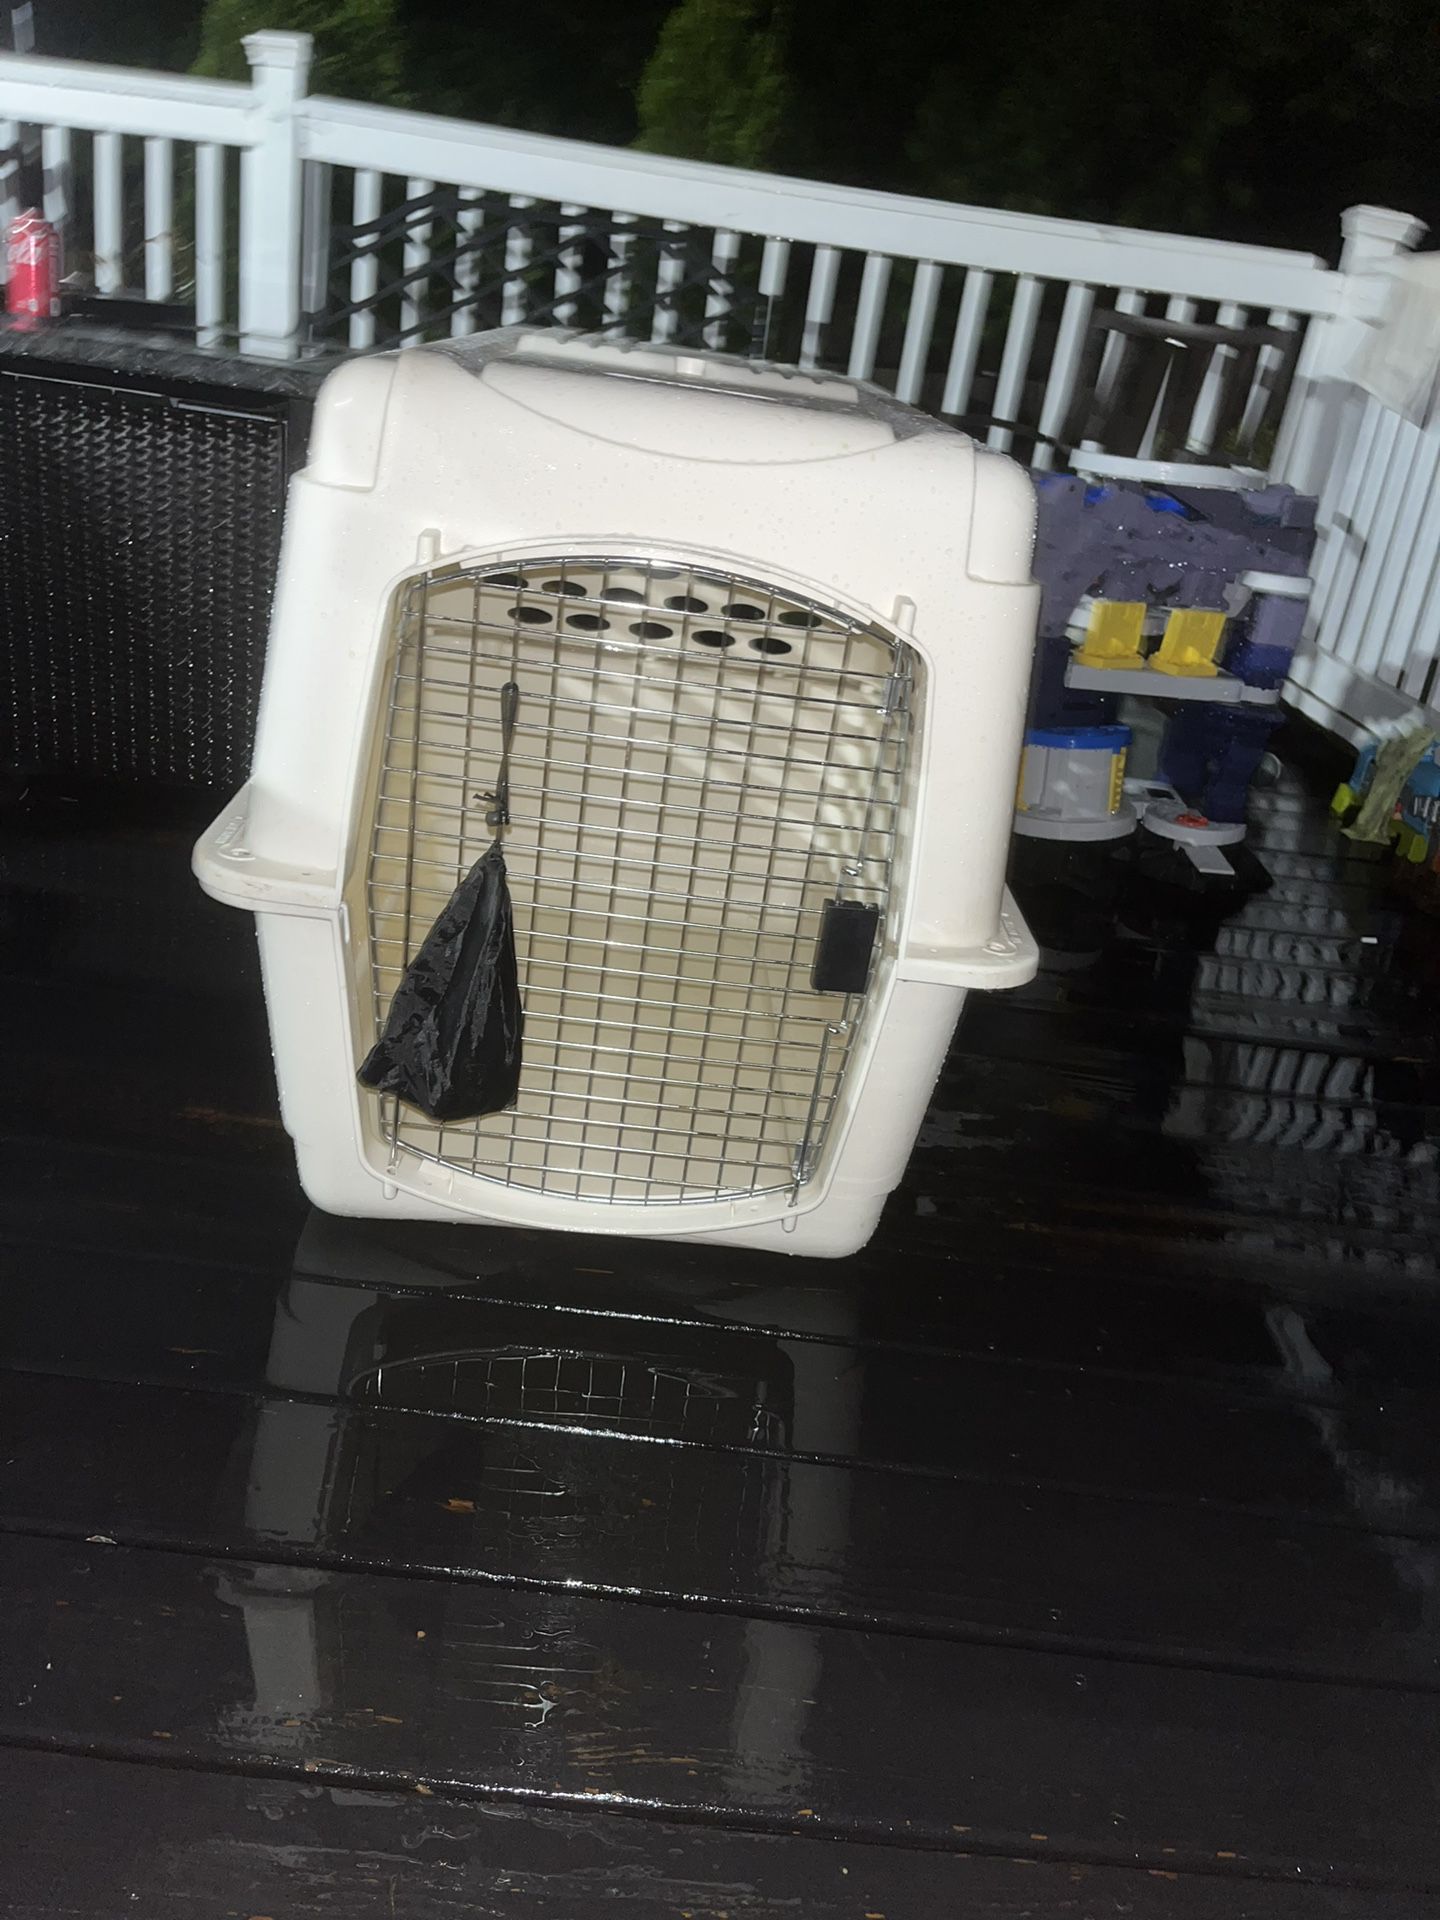 Large dog Crate